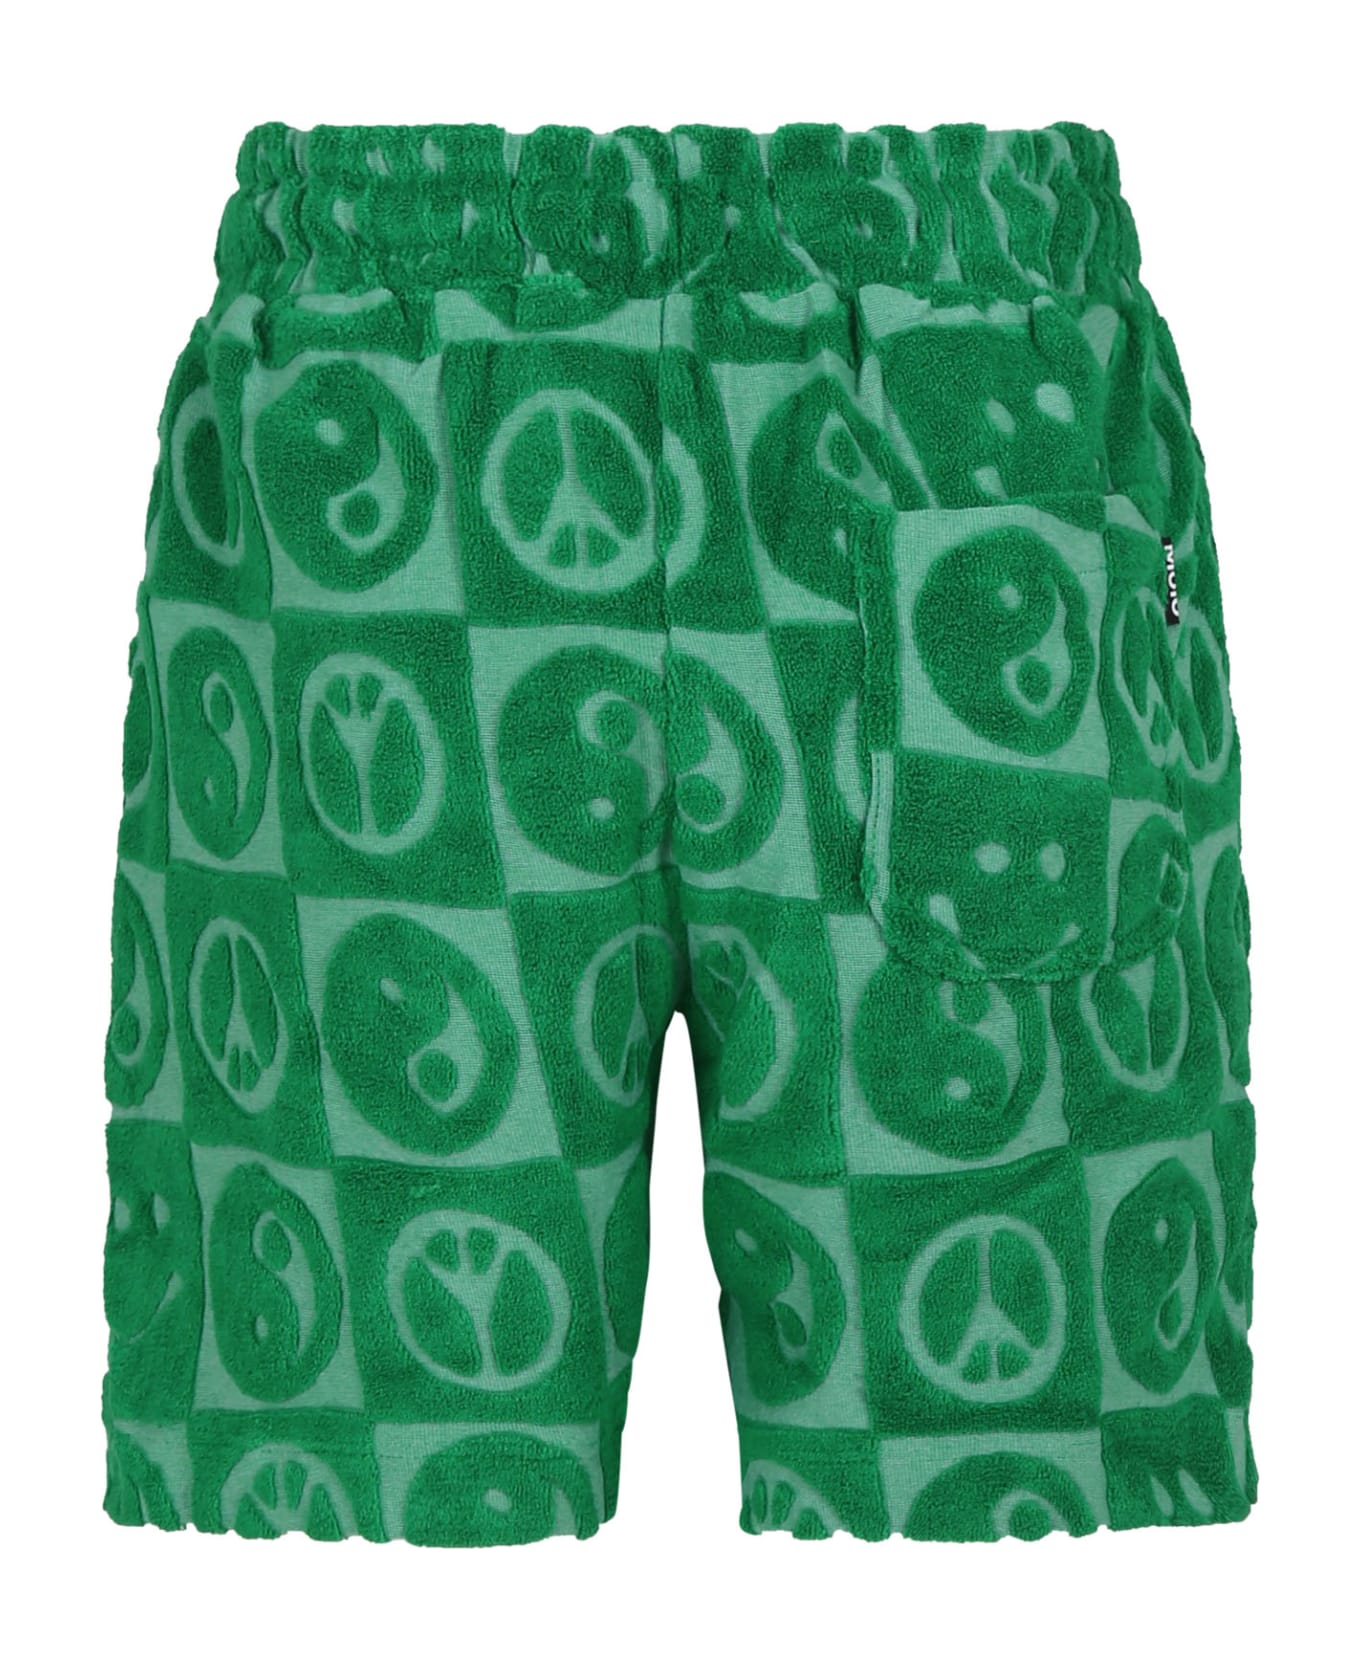 Molo Green Short For Boy With Yin And Yang - Green ボトムス